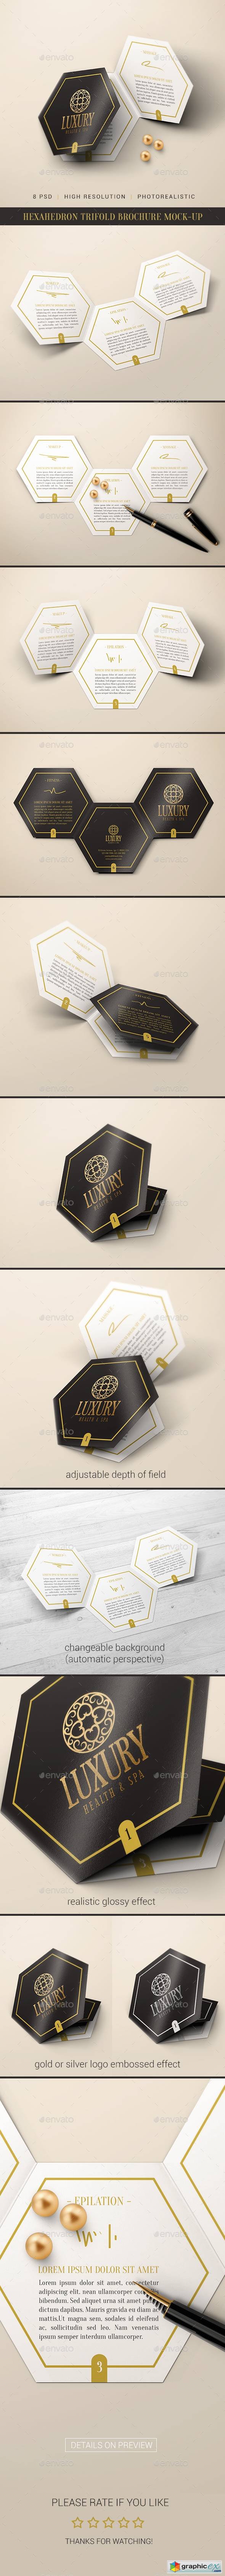 Hexahedron Trifold Brochure Mock-Up